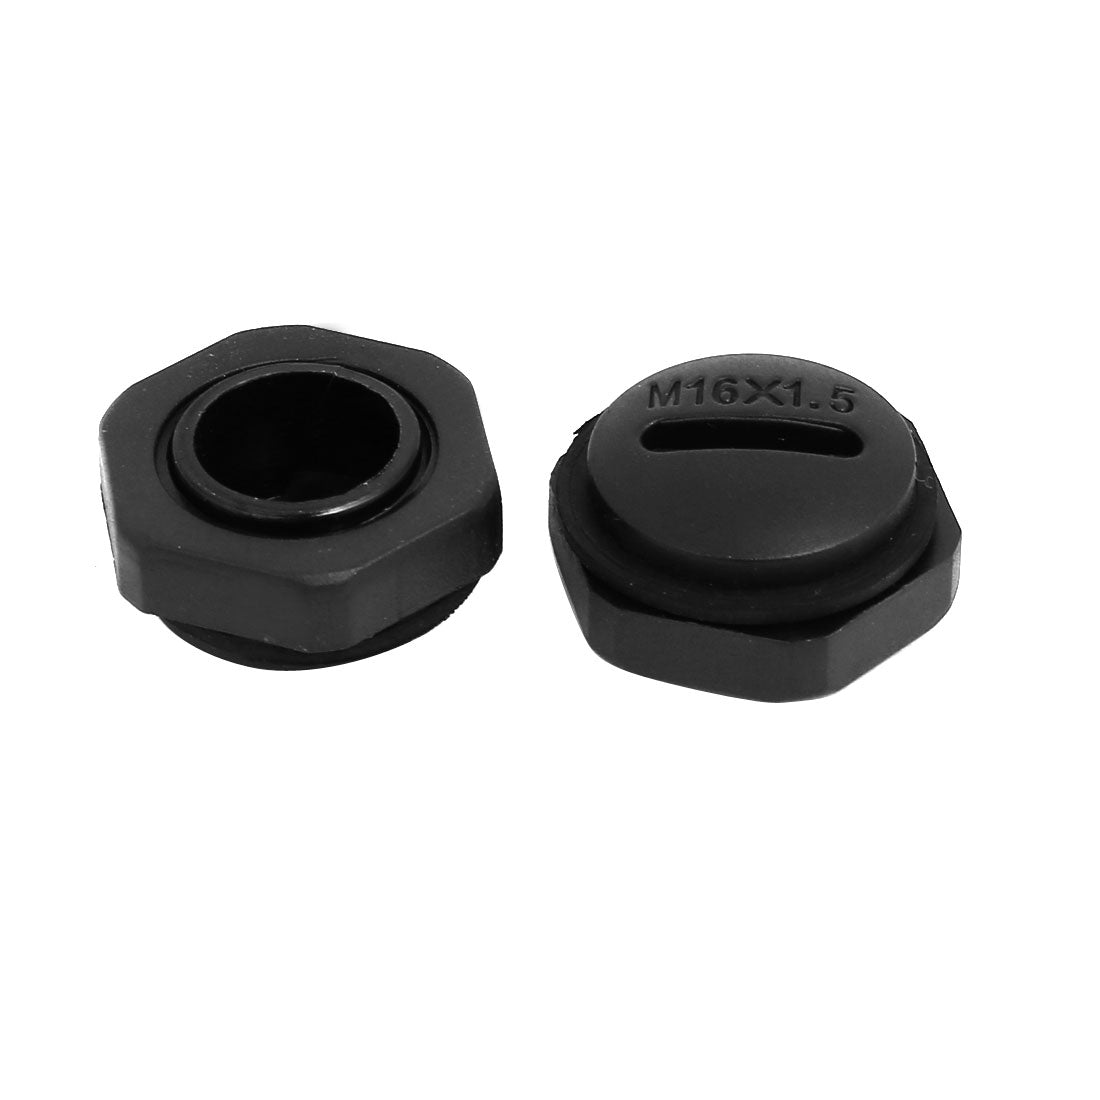 uxcell Uxcell M16 Nylon Male Threaded Cable Gland Screw End Cap Cover Black 10pcs